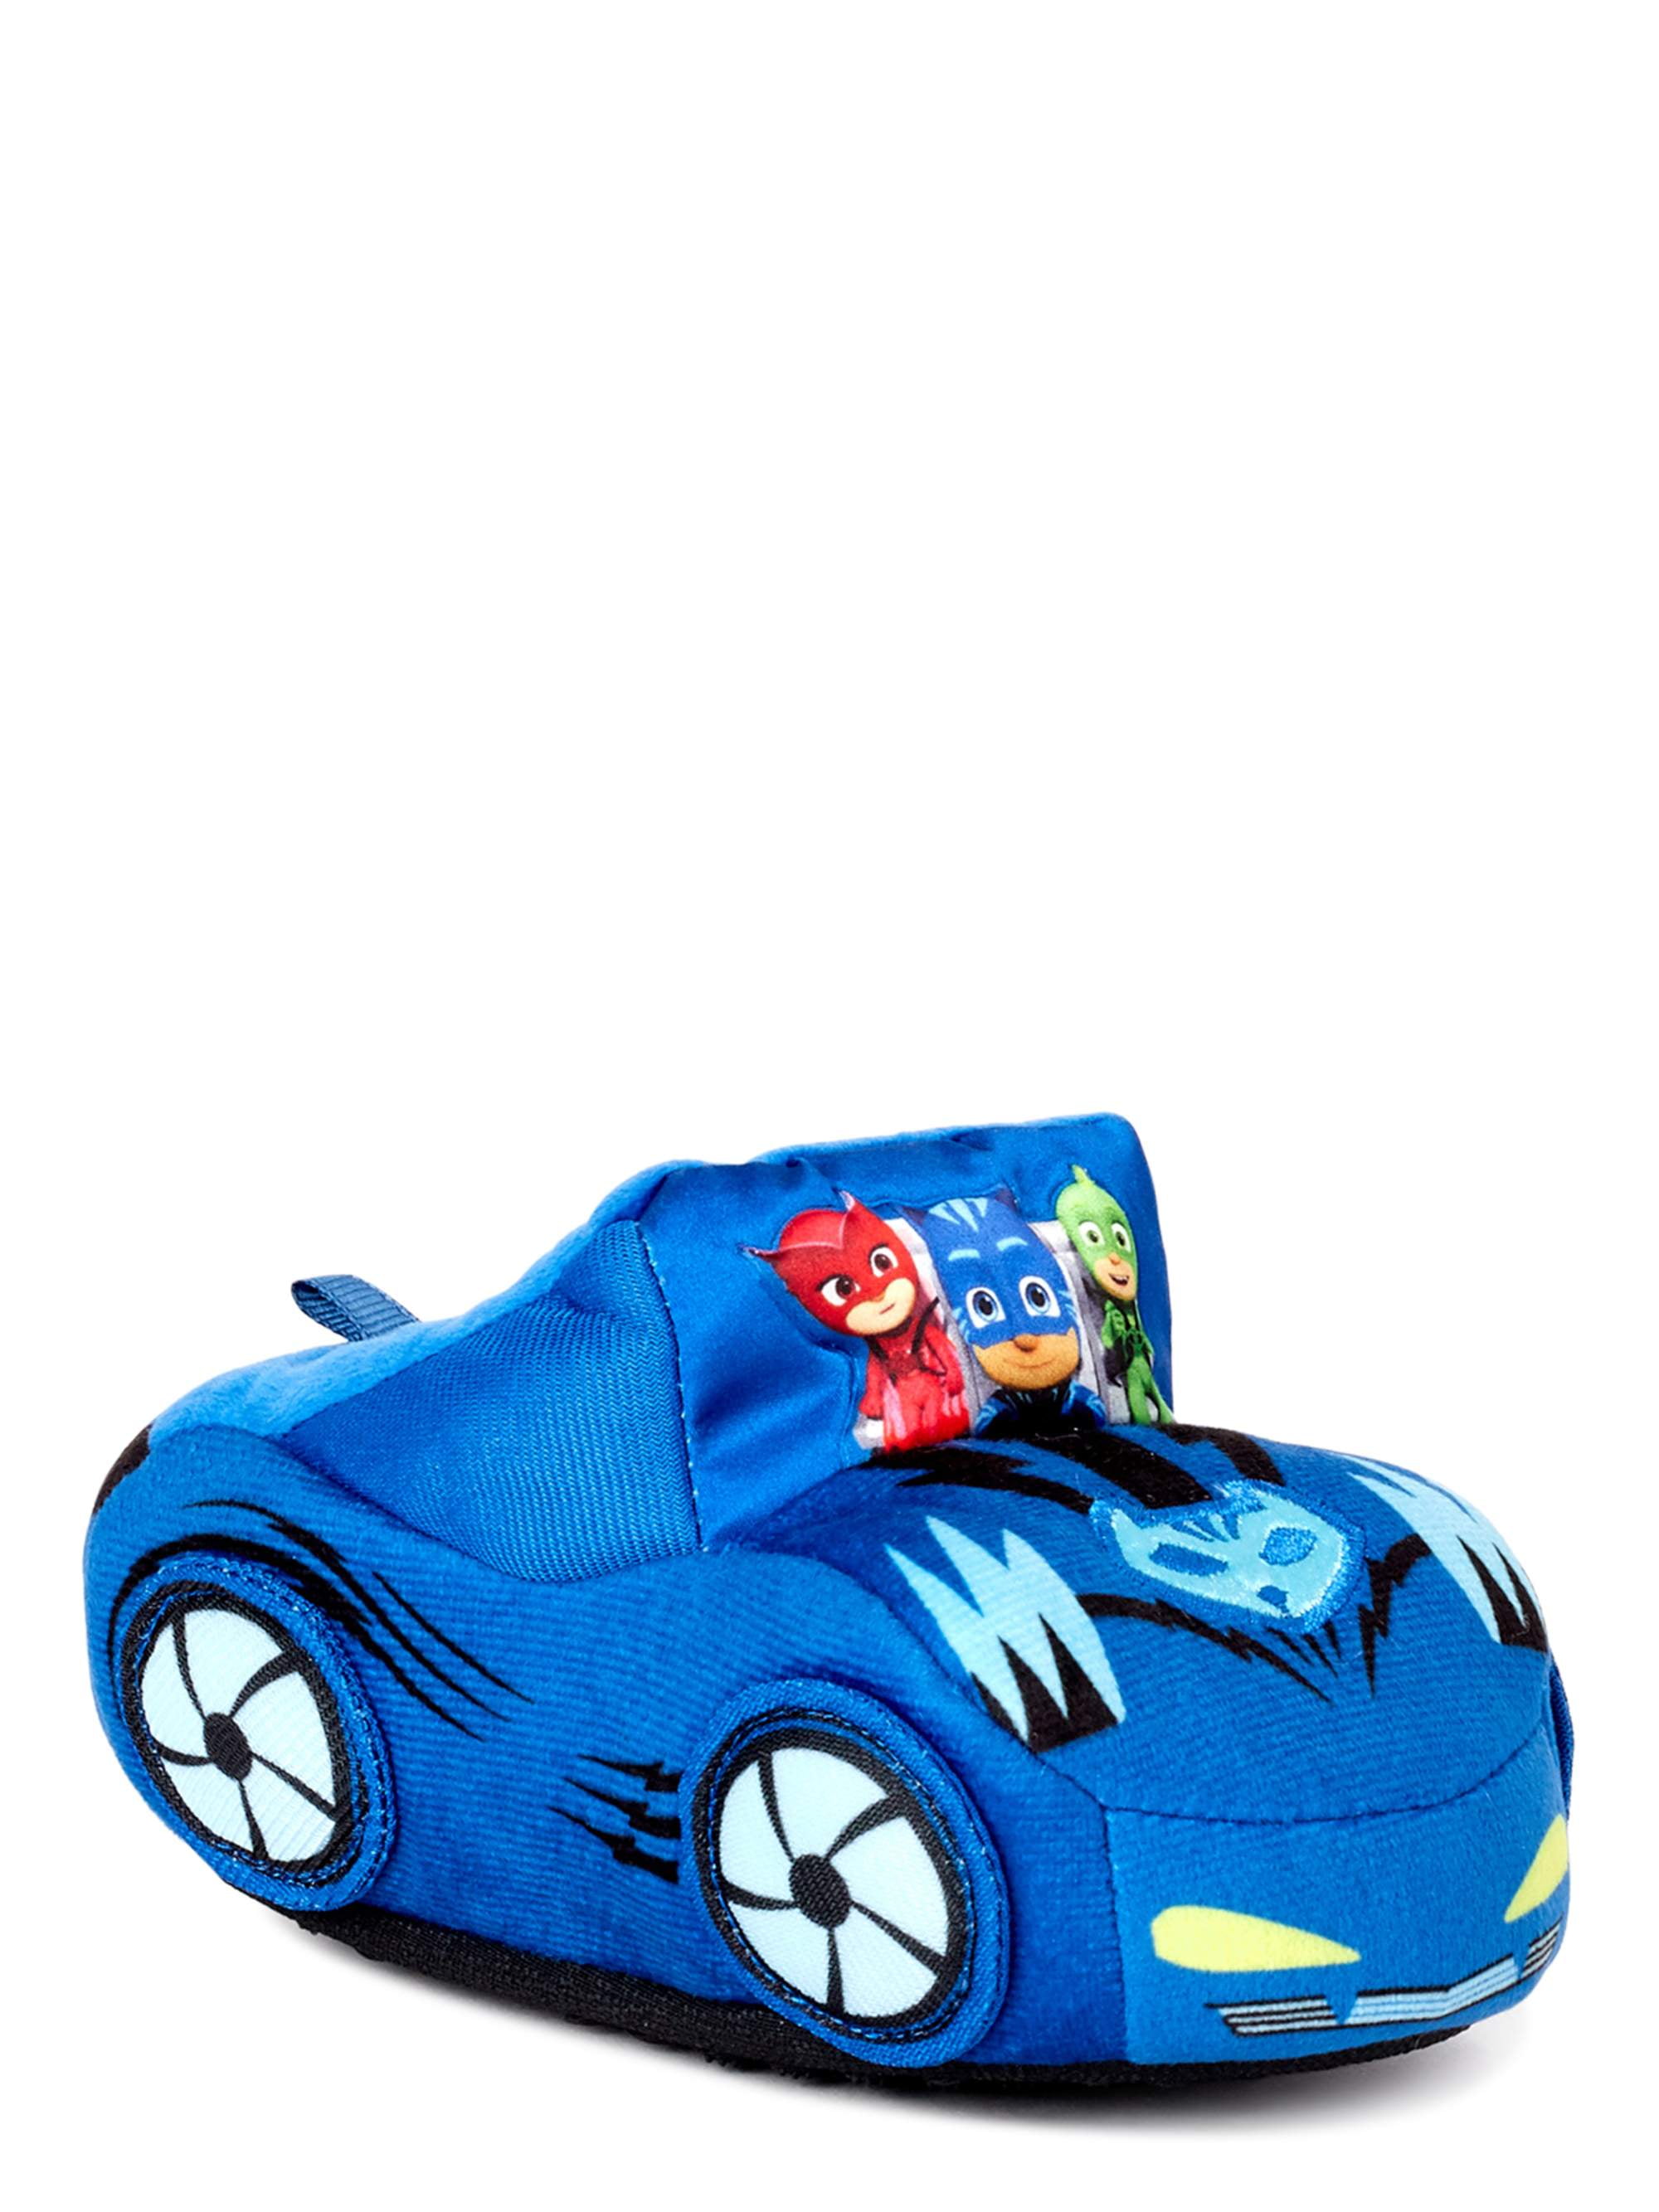 Pj Masks Slippers Easy Touch Fastening Toddlers Booties Gekko Catboy Owlette